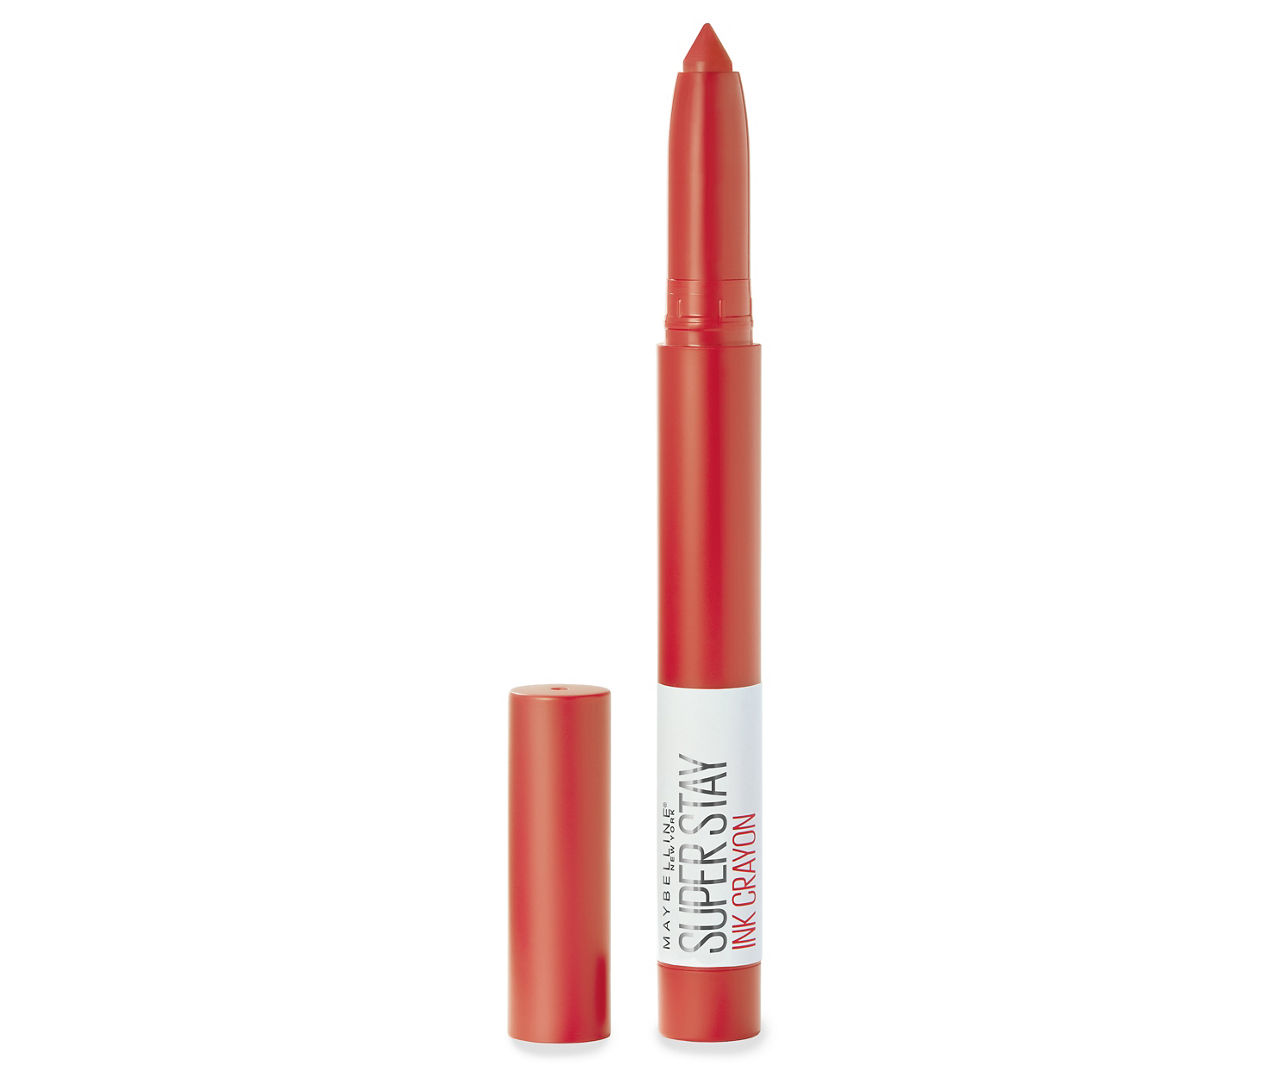 Superstay Ink Crayon Lipstick in Laugh Louder